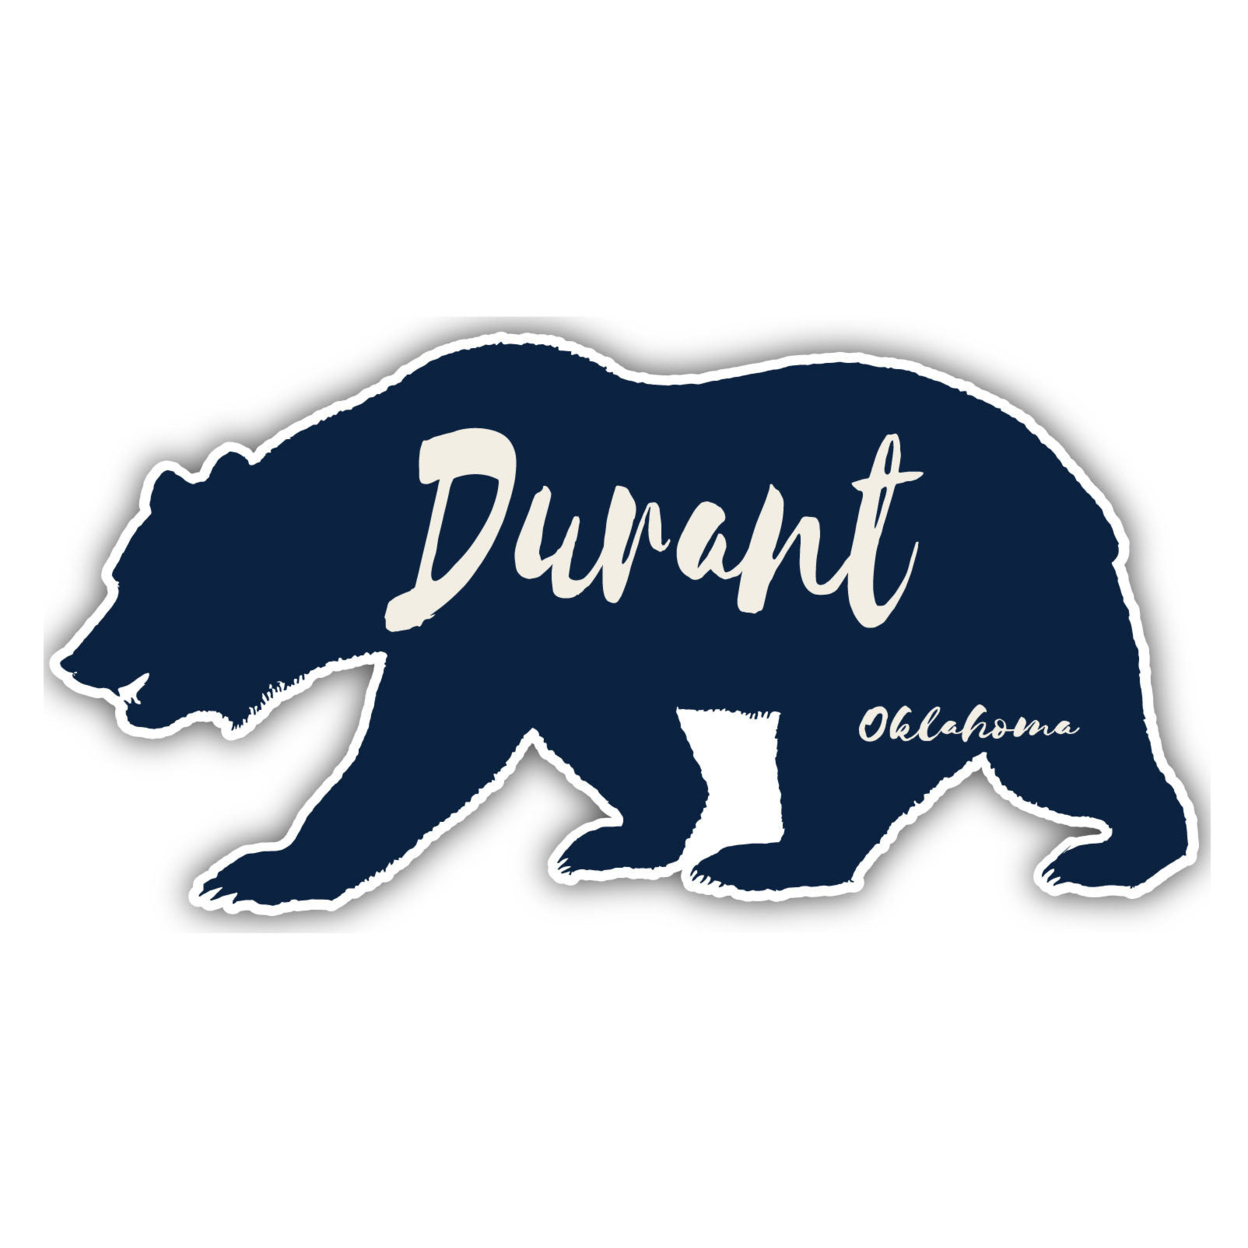 Durant Oklahoma Souvenir Decorative Stickers (Choose Theme And Size) - 4-Pack, 6-Inch, Camp Life